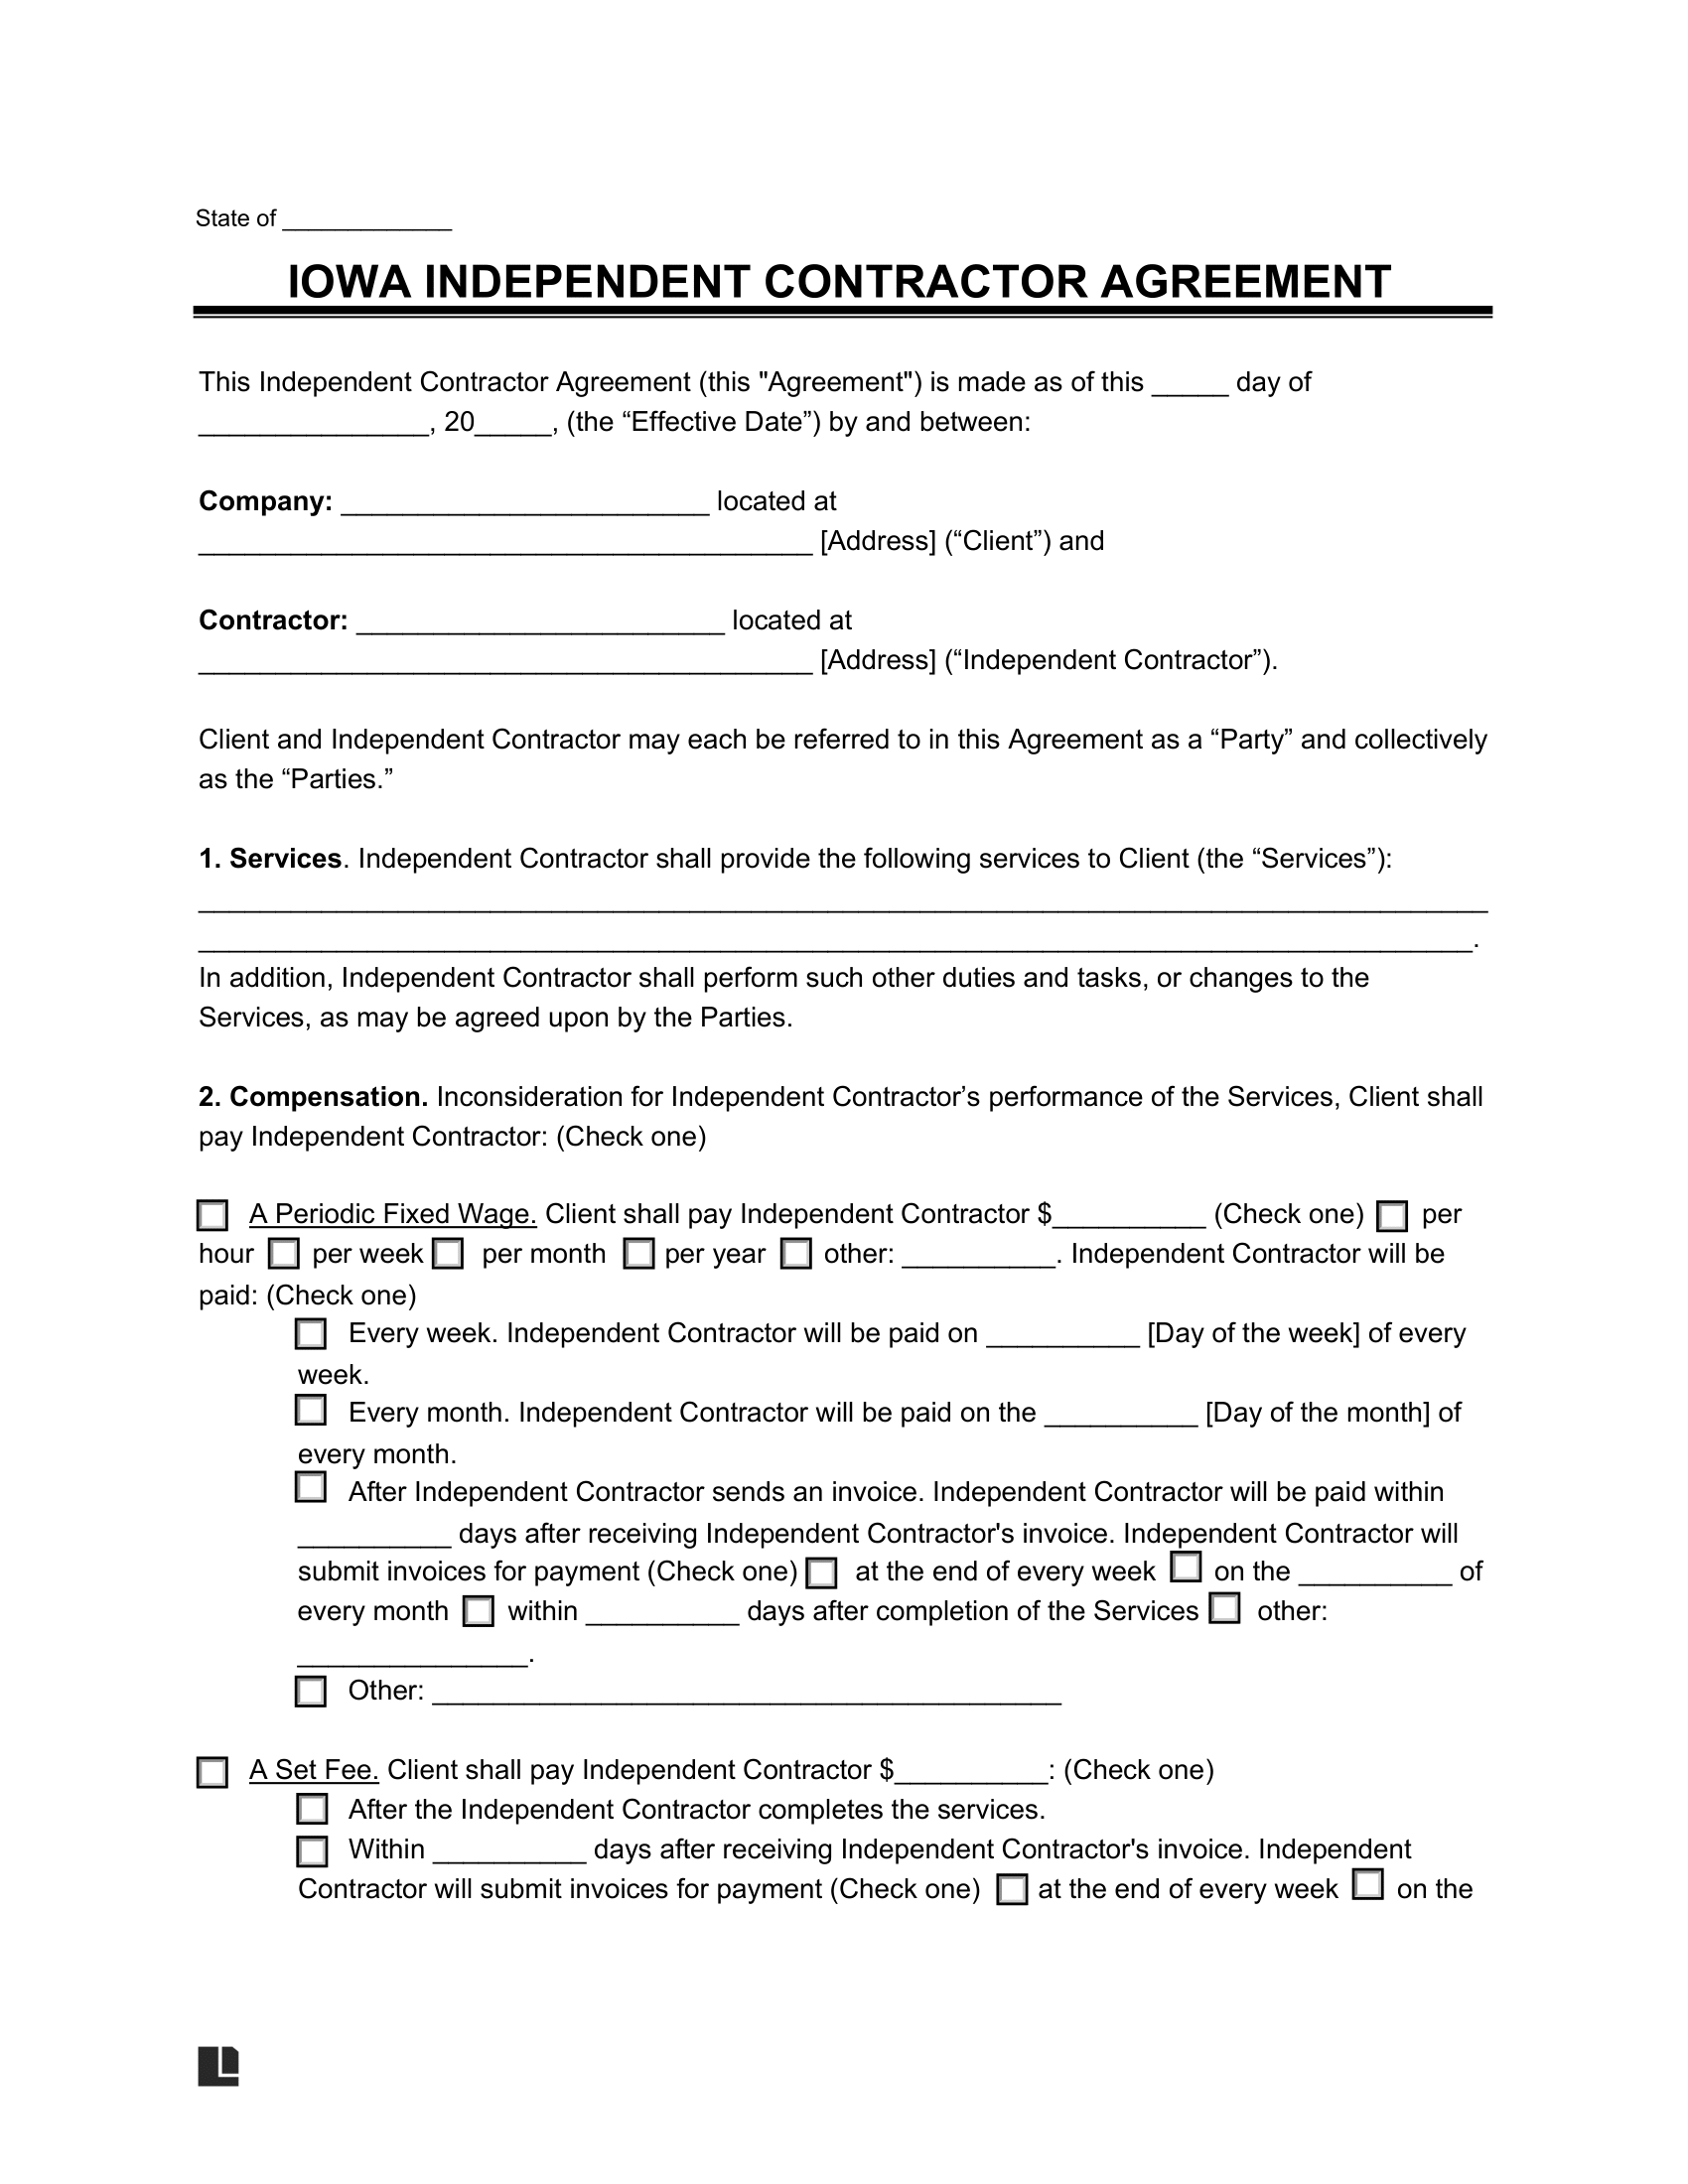 Iowa Independent Contractor Agreement Template